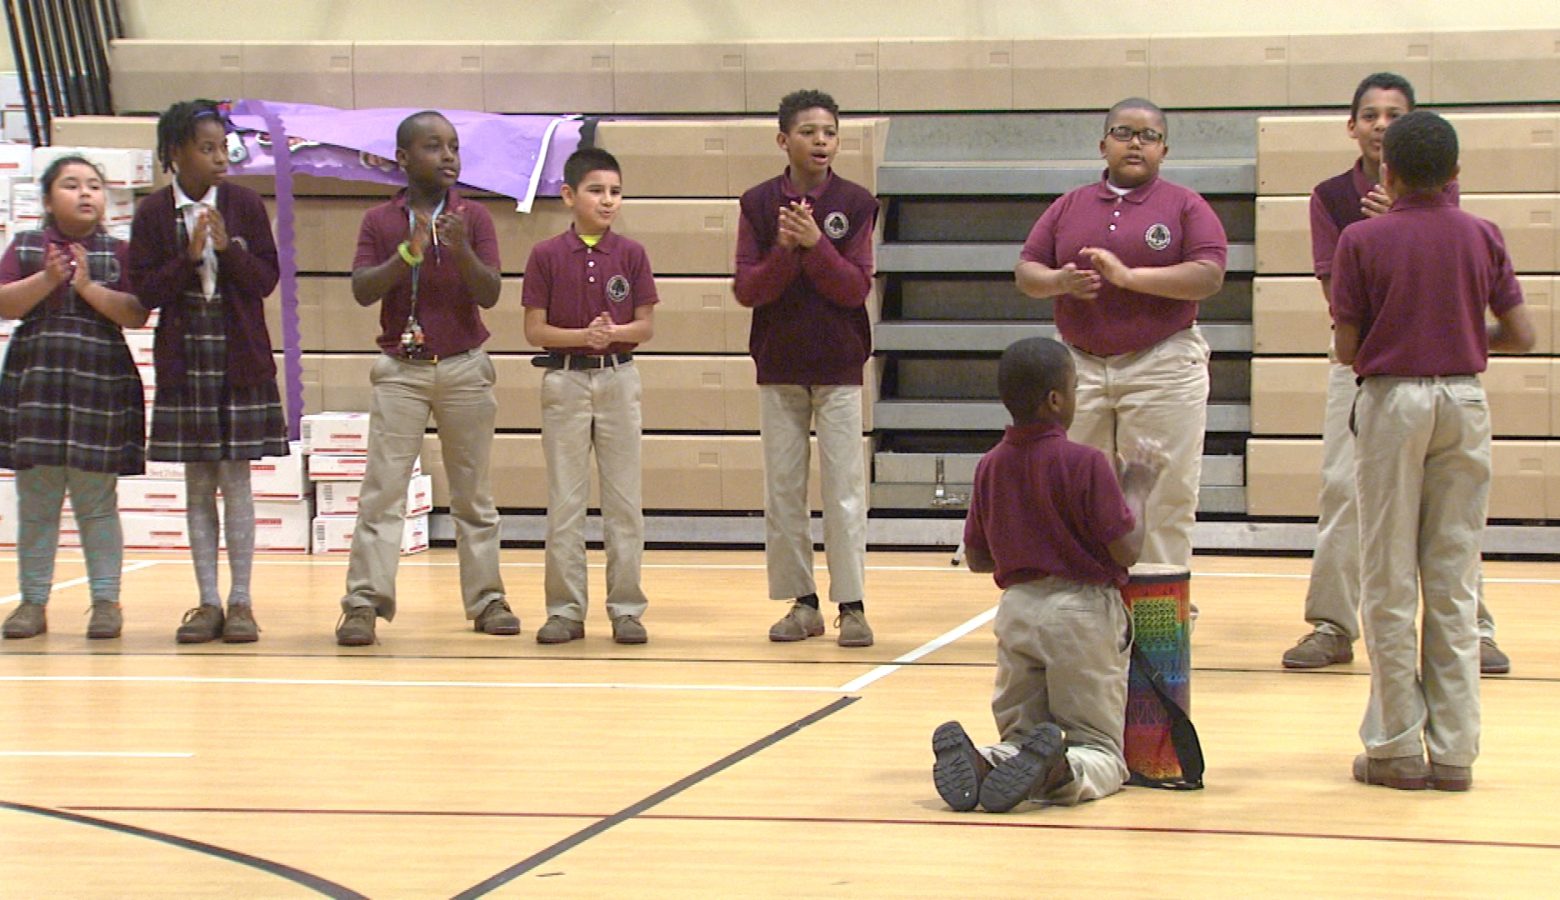 Students at Tindley Genesis Academy in Indianapolis participate in the morning meeting, which blends songs, chants and dancing. Music is at the center of all curriculum at the school. (Steve Burns/WTIU)